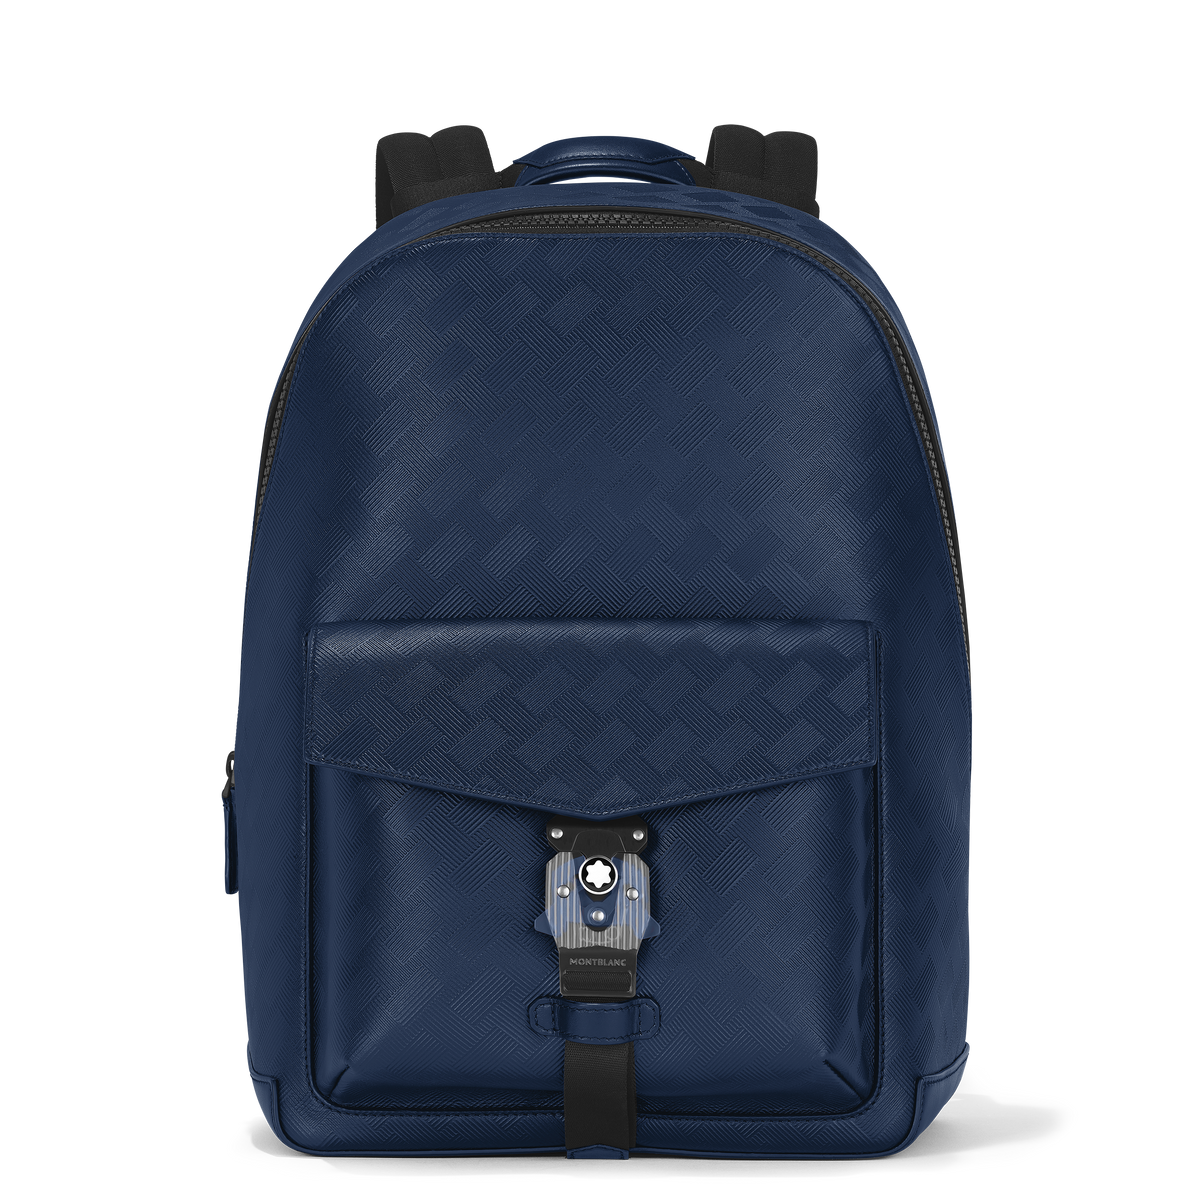 Extreme 3.0 backpack with M LOCK 4810 buckle